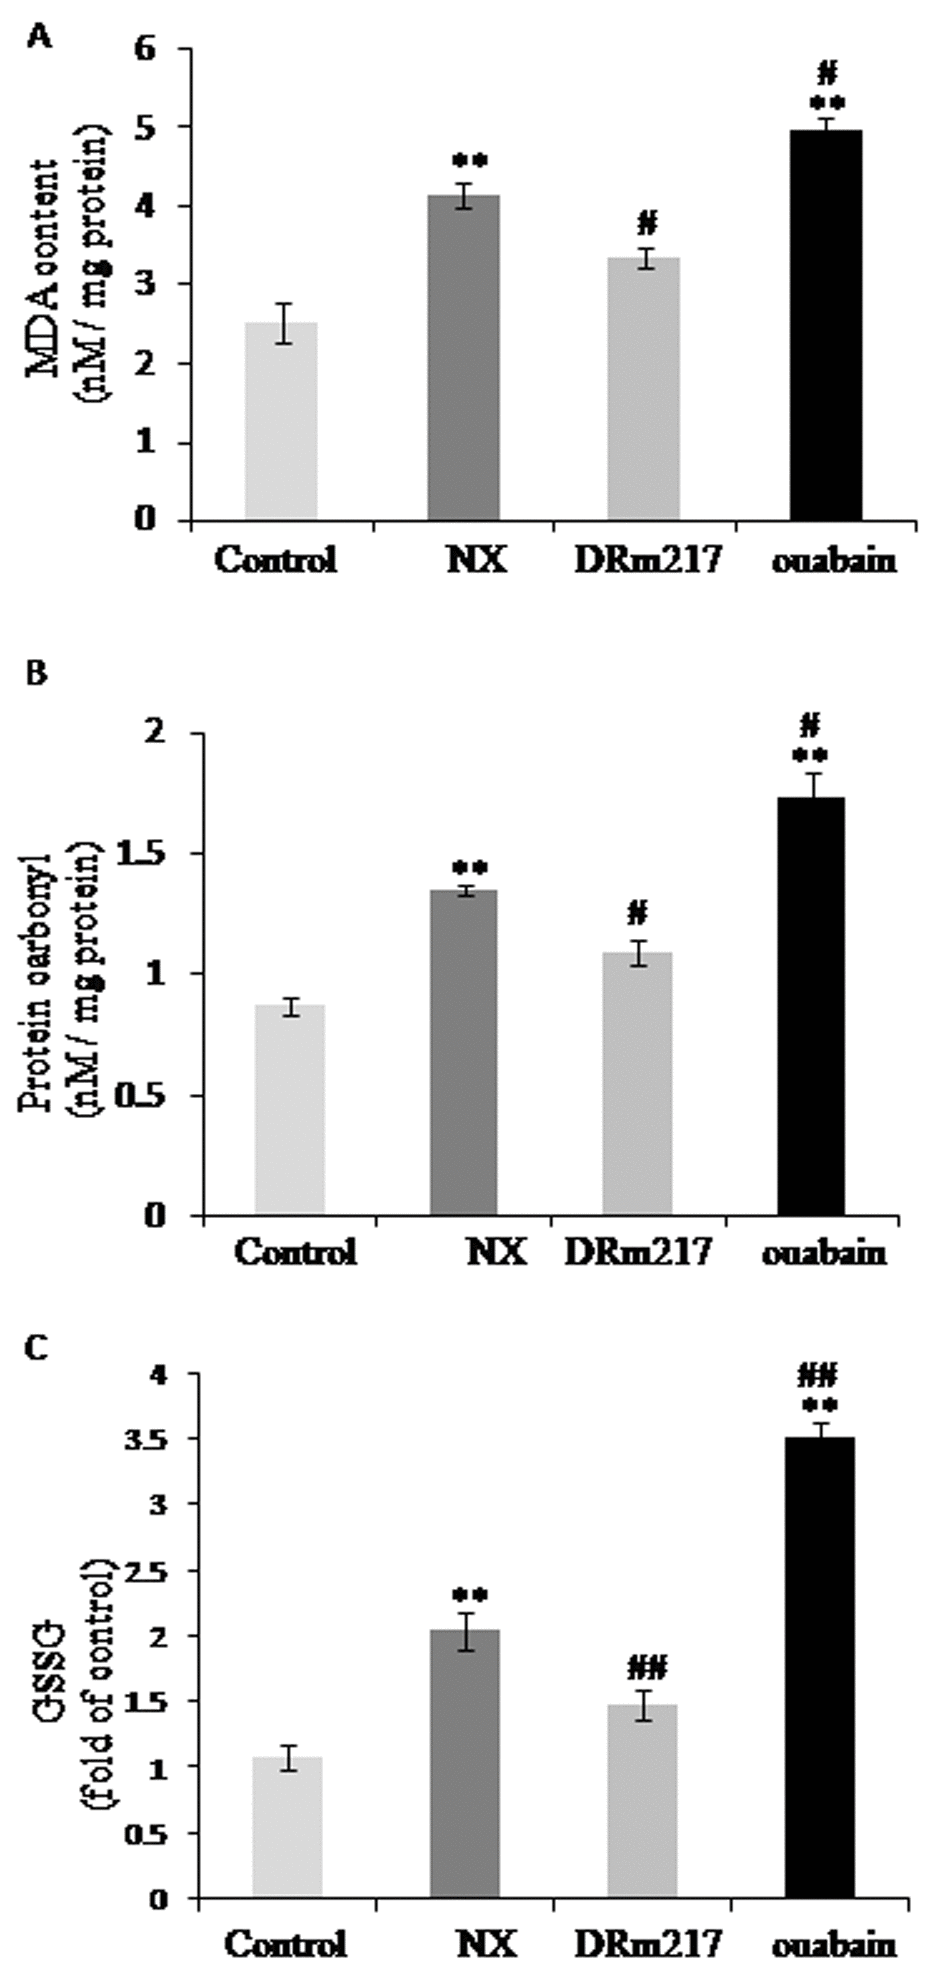 DRm217 attenuated but ouabain strengthened oxidative stress. Contents of Malondialdehyde contents (A), protein carbonyl contents (B), and oxidized glutathione (C) in different renal tissues. DRm217 treatment significantly attenuated but ouabian enhanced the content of malondialdehyde, protein carbonyl and oxidized glutathione in the renal tissues of 5/6 nephrectomized rats. n=6-8. Means±SEM; * p, **ppp